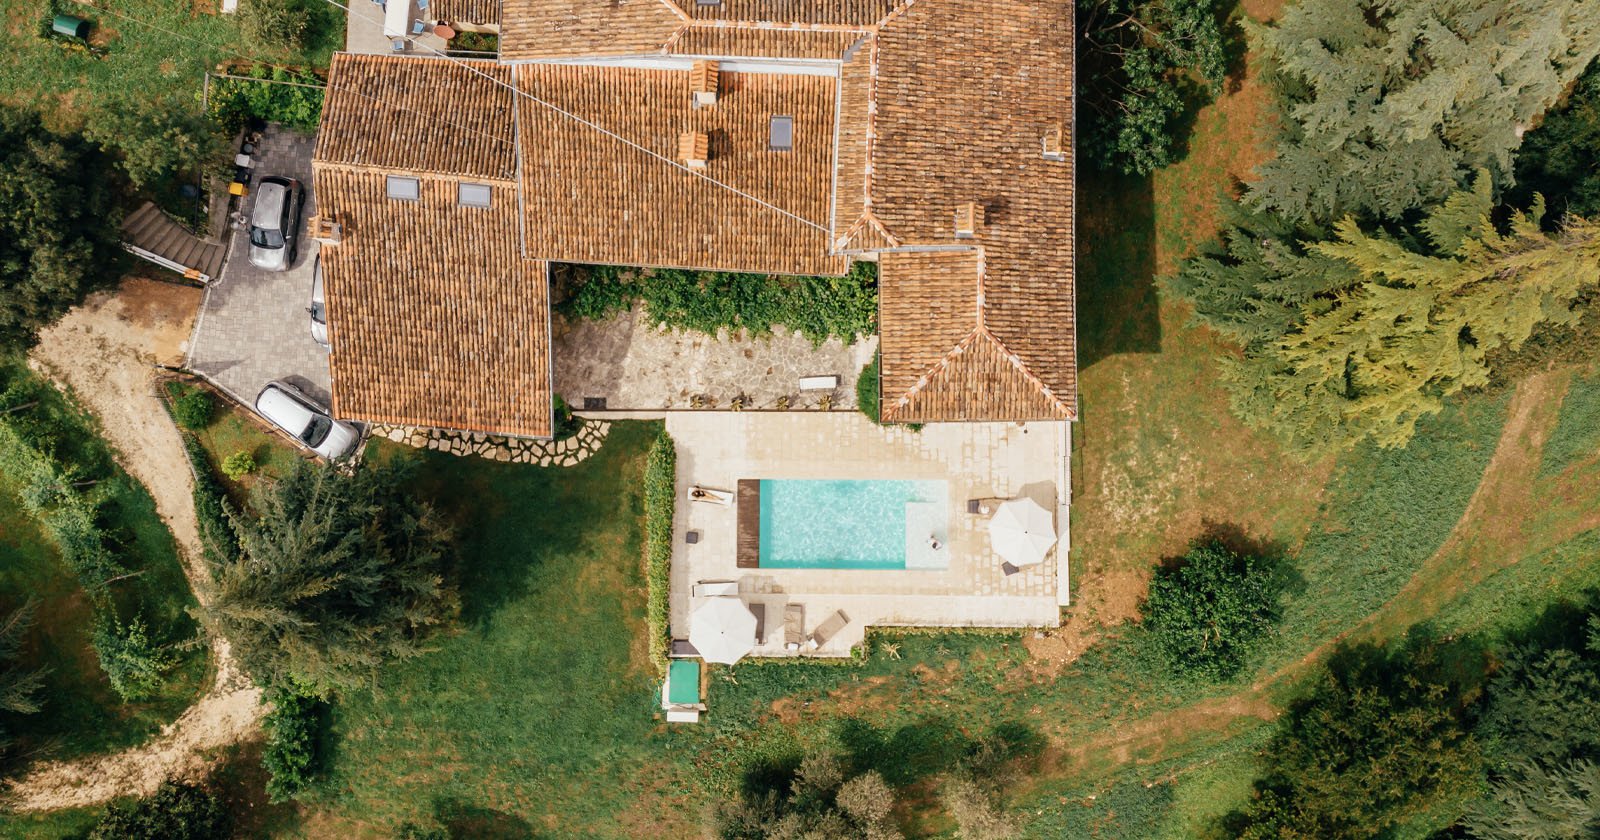 French Officials Use Satellite Photos and AI to Spot Unregistered Pools